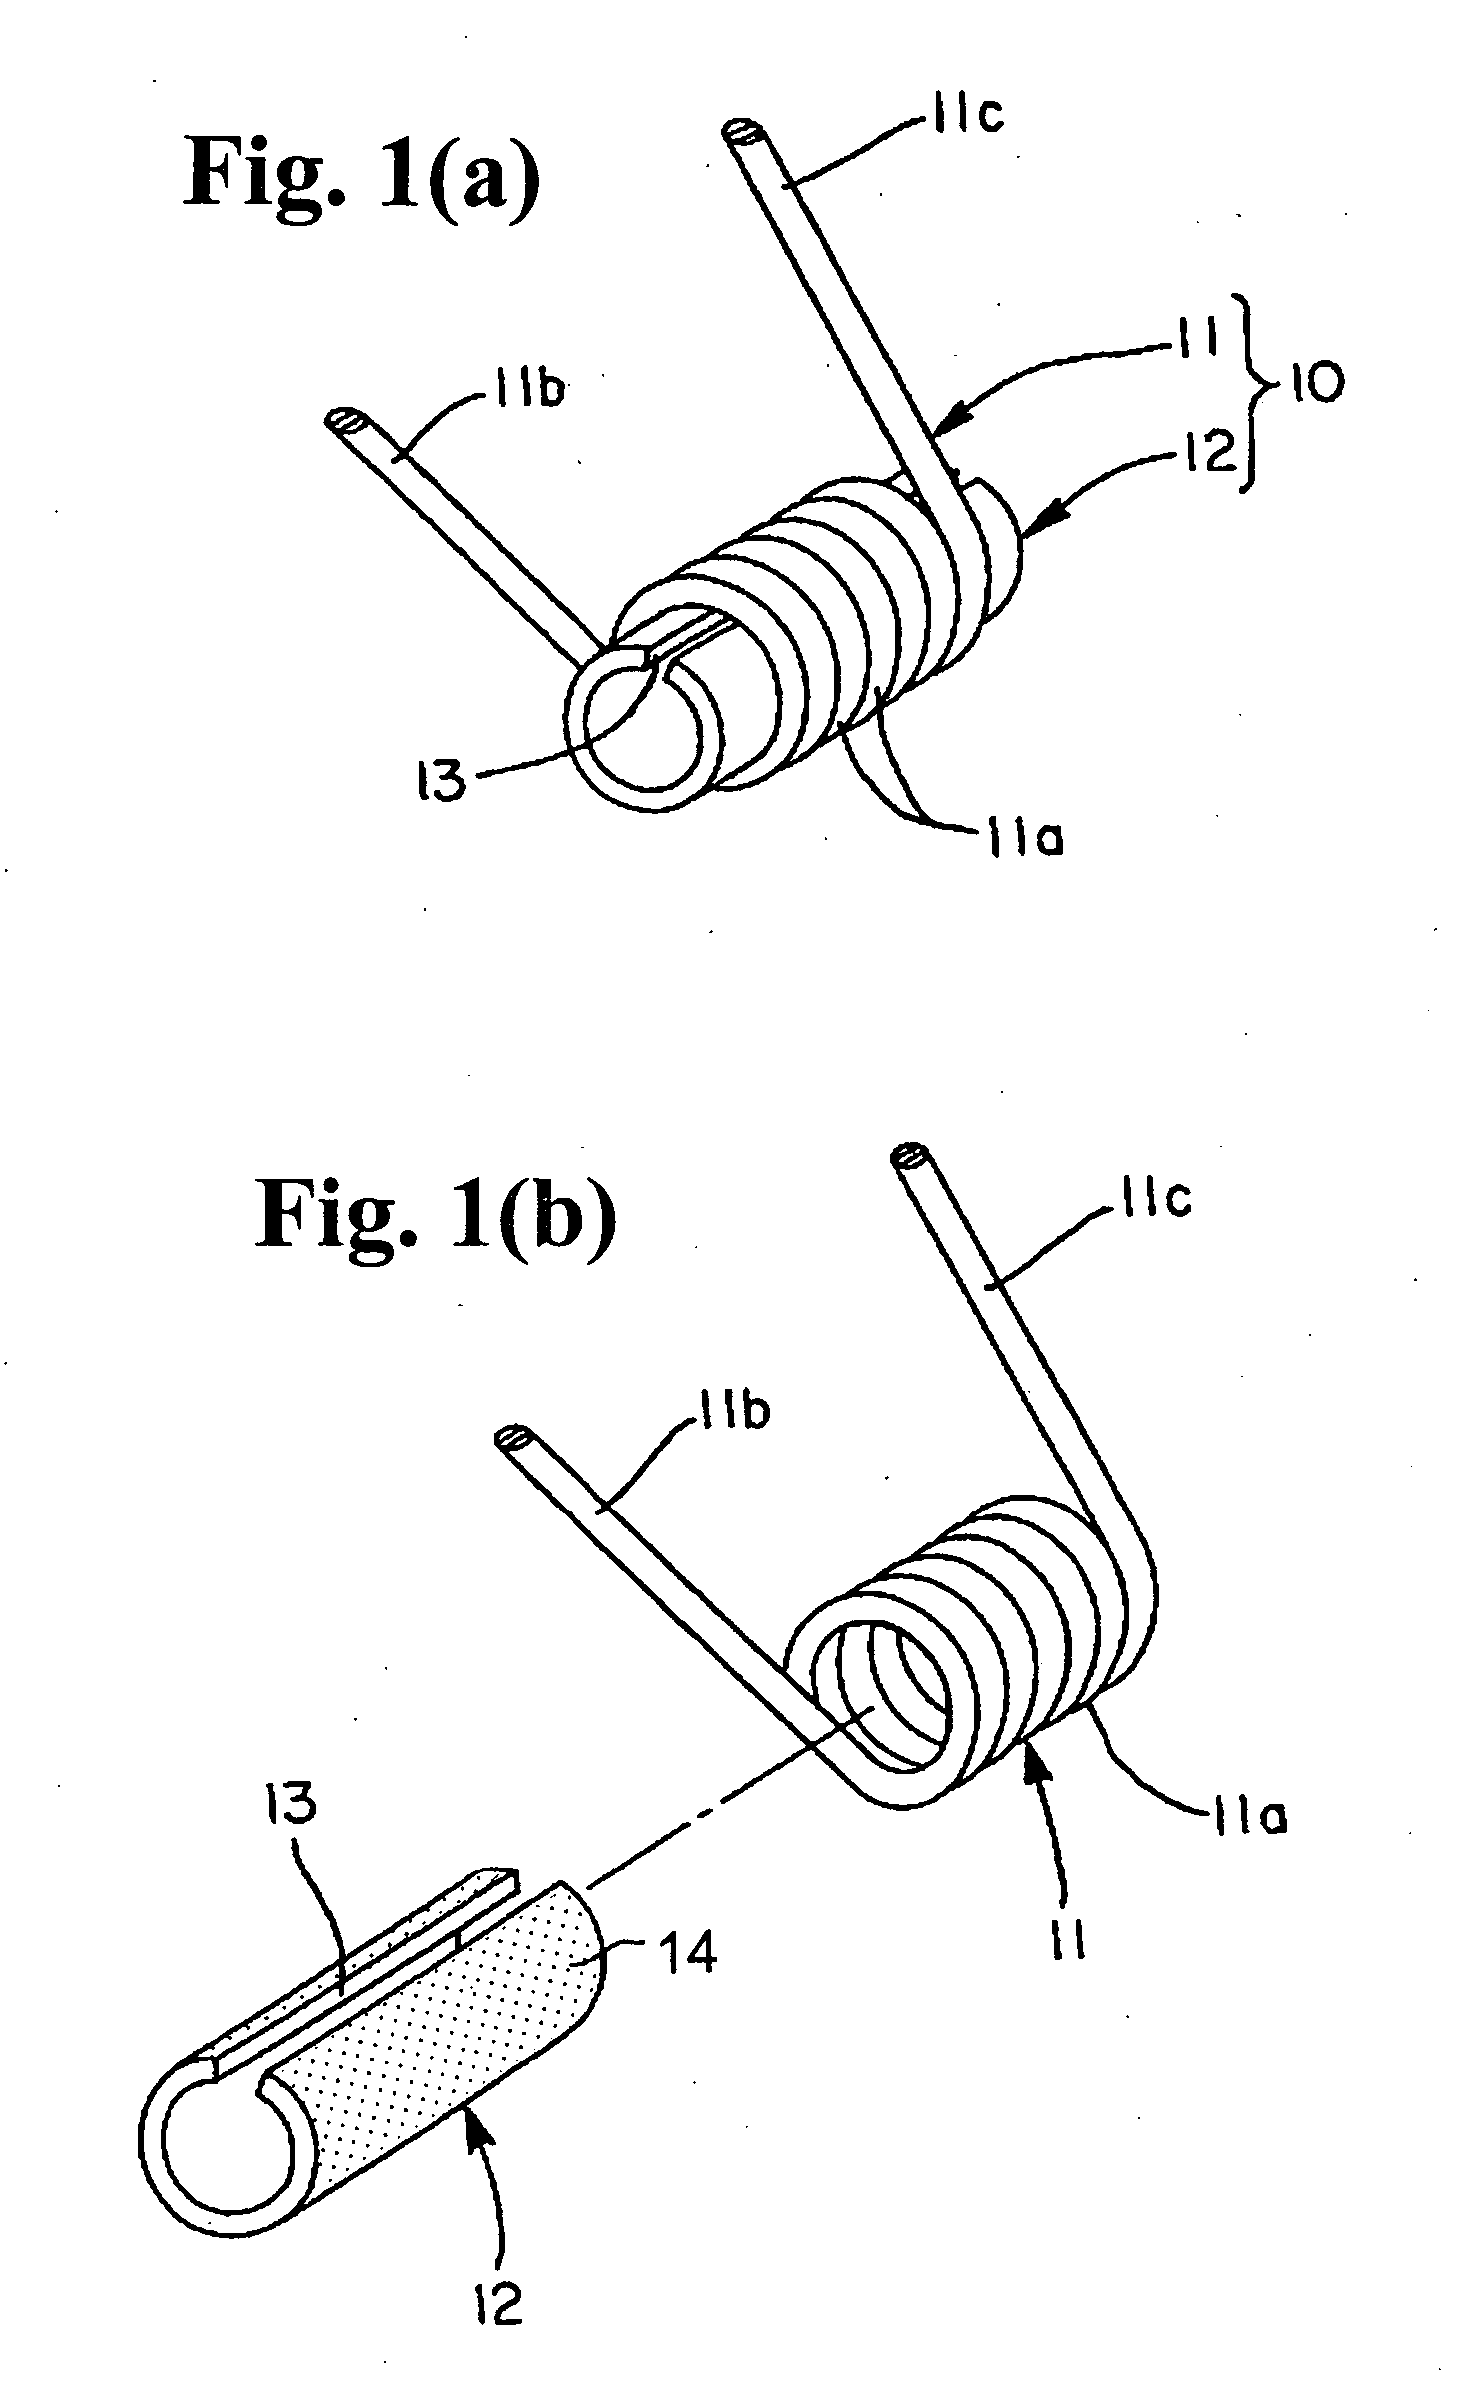 Spring unit with damper and opening-closing device